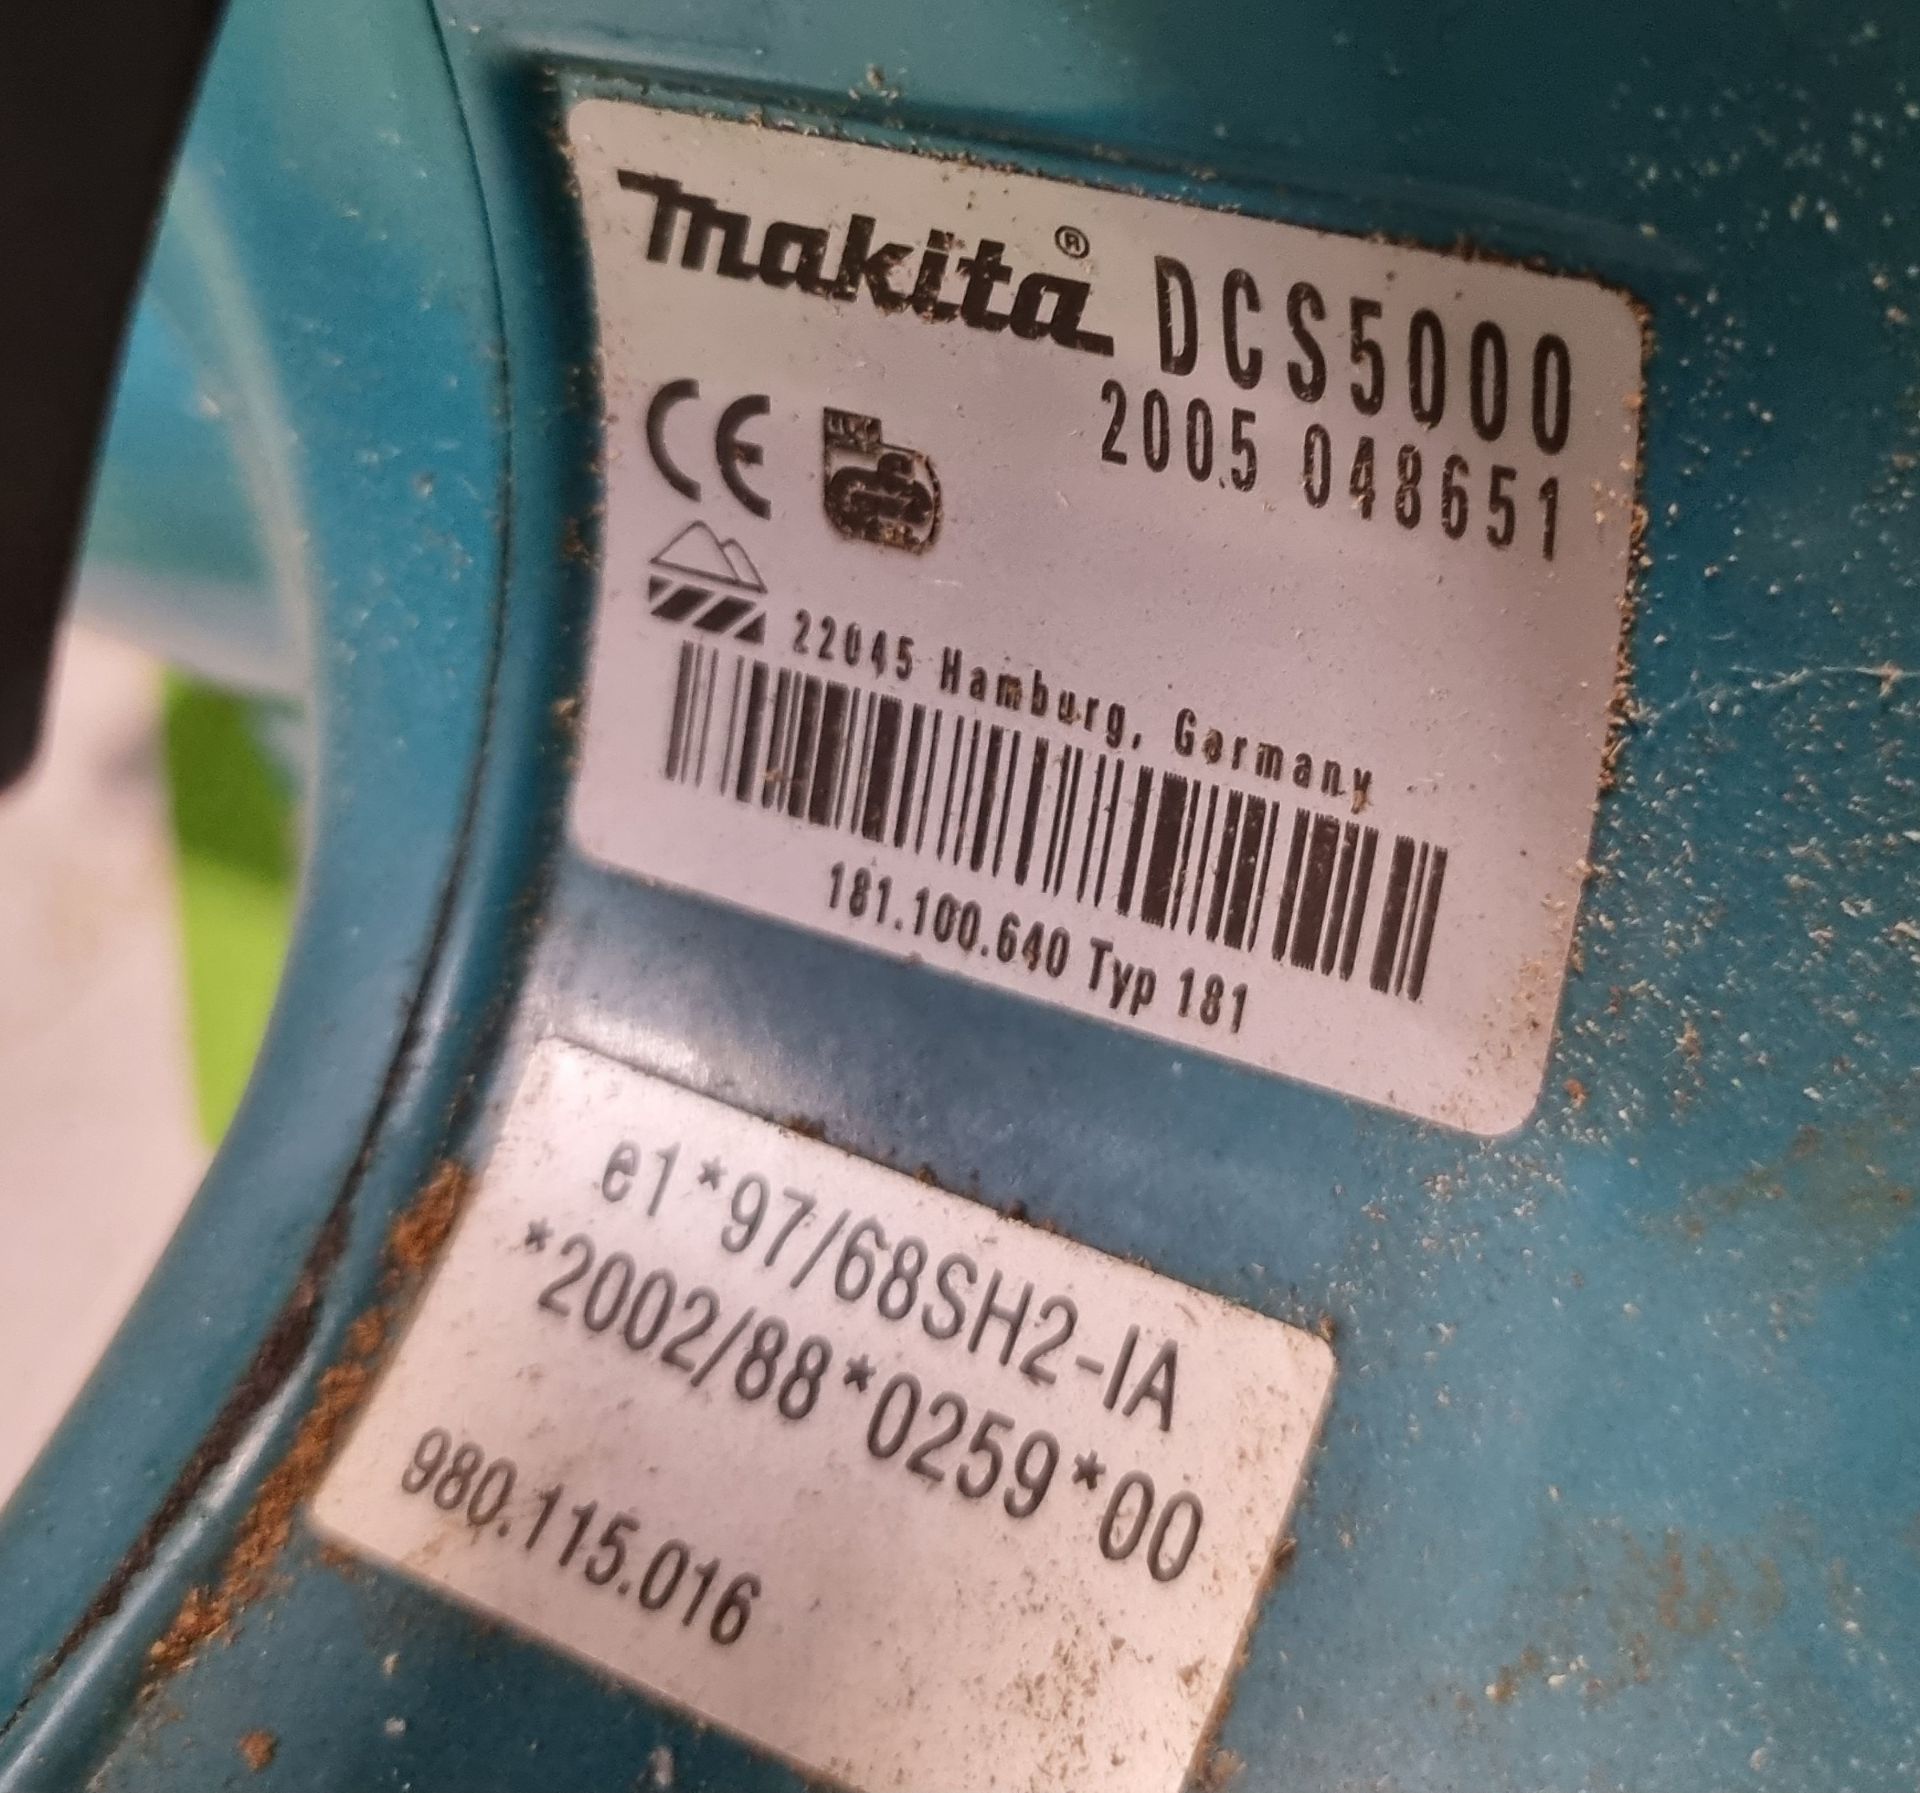 4x Makita DCS5000 50cc petrol chainsaw bodies - AS SPARES OR REPAIRS - Image 9 of 9